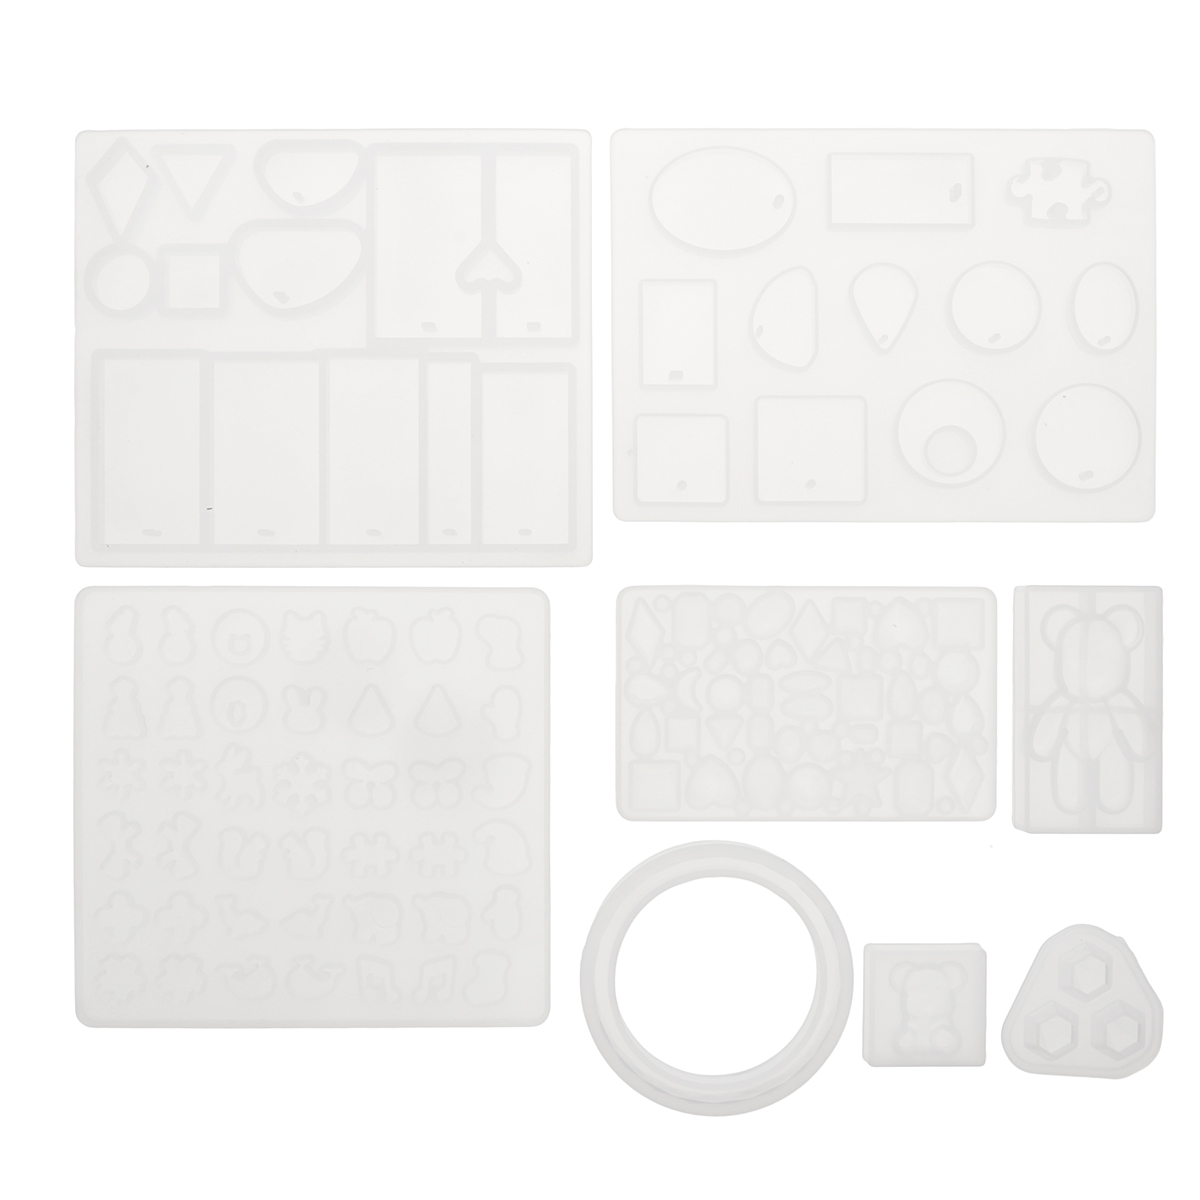 277Pcs-Jewelry-Silicone-Mold-Set-DIY-Craft-Resin-Casting-Making-Jewelry-Pendant-1768742-10